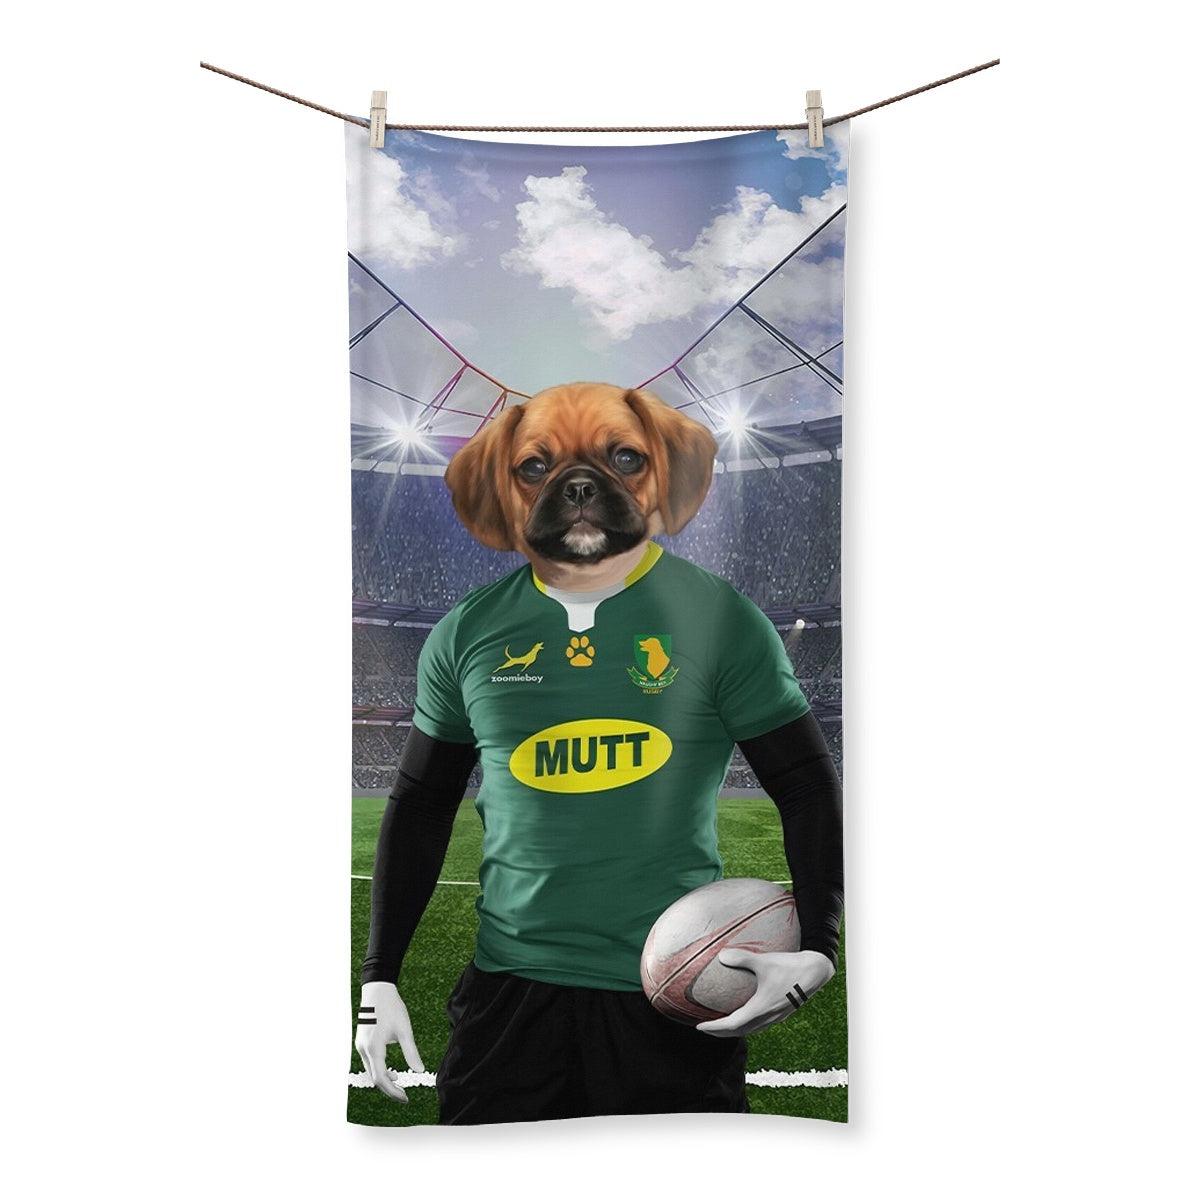 South Africa Rugby Team: Paw & Glory, paw and glory, custom dog blanket with picture, dog printed blanket, blanket with dogs face, dog blanket custom, personalized blanket with dog, dog picture blanket, Pet Portrait blanket